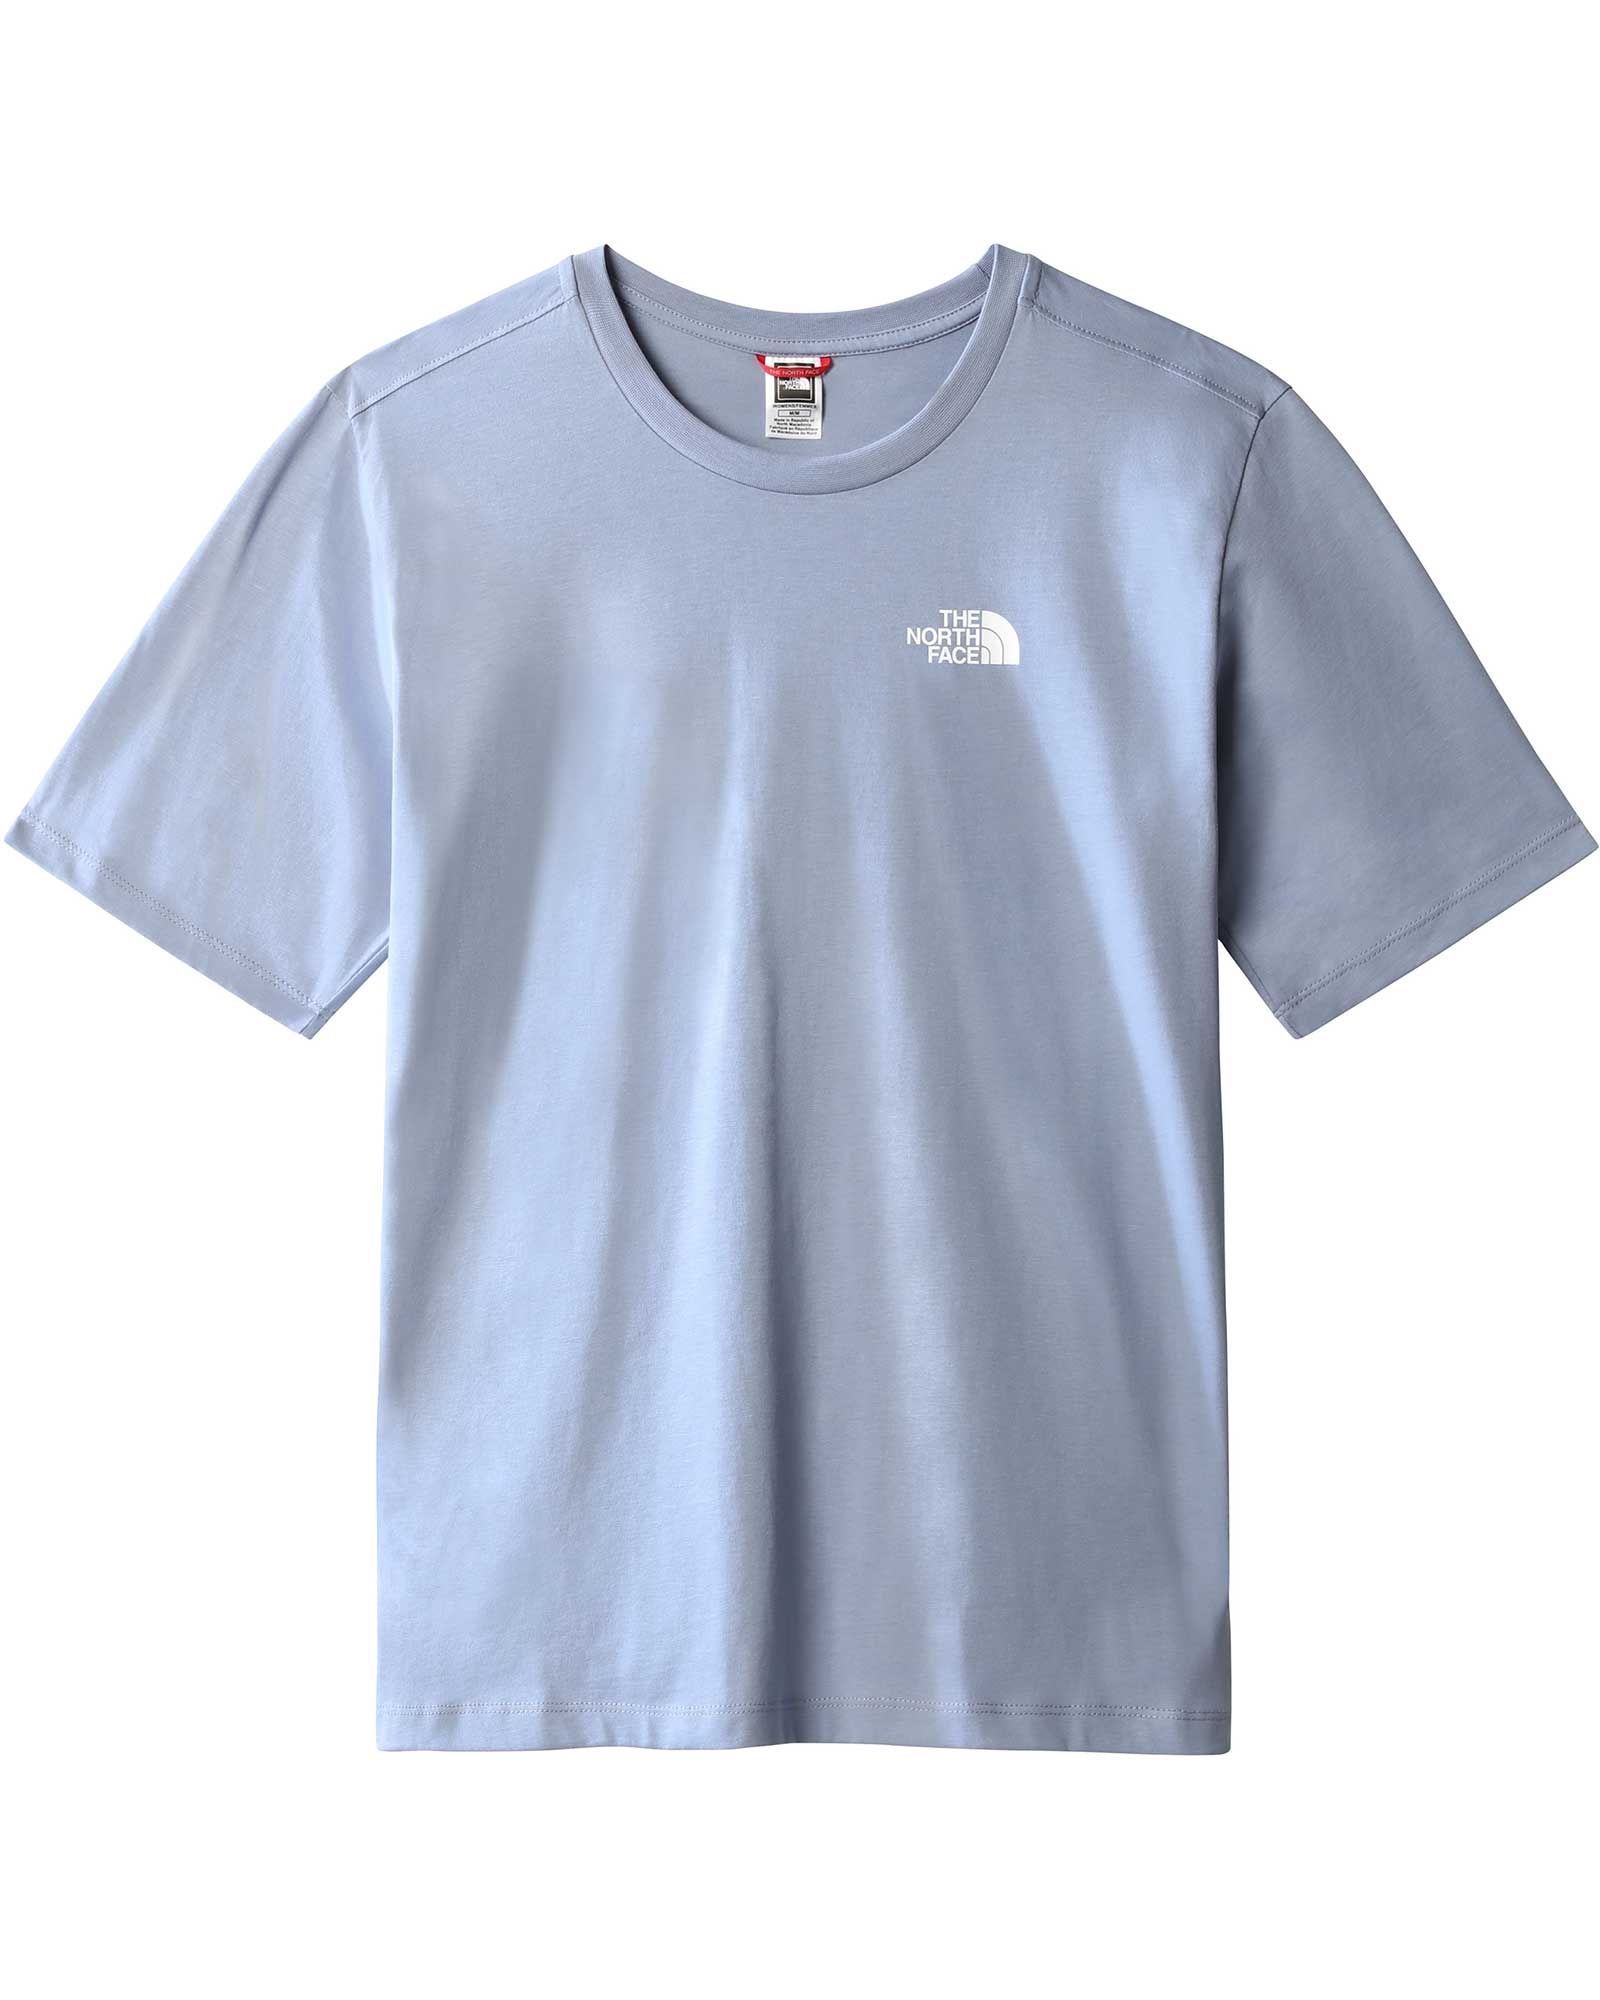 The North Face Relaxed Simple Dome Women’s T Shirt - Folk Blue S